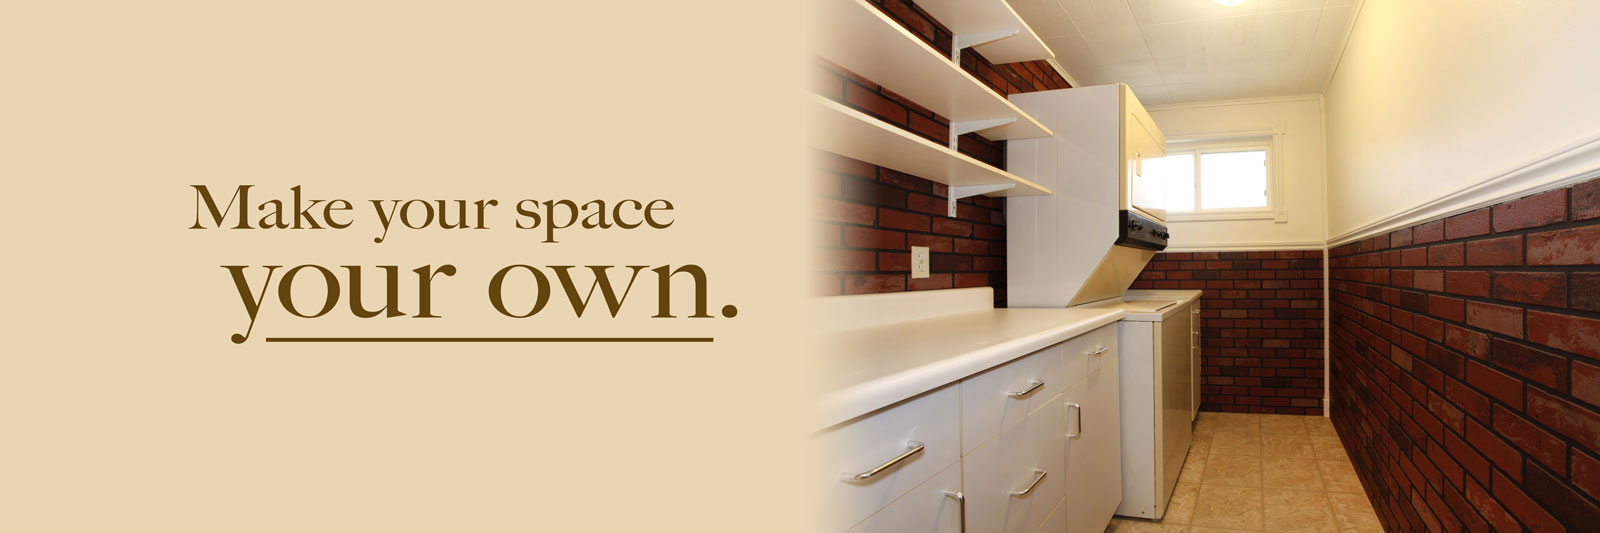 Make your space your own.